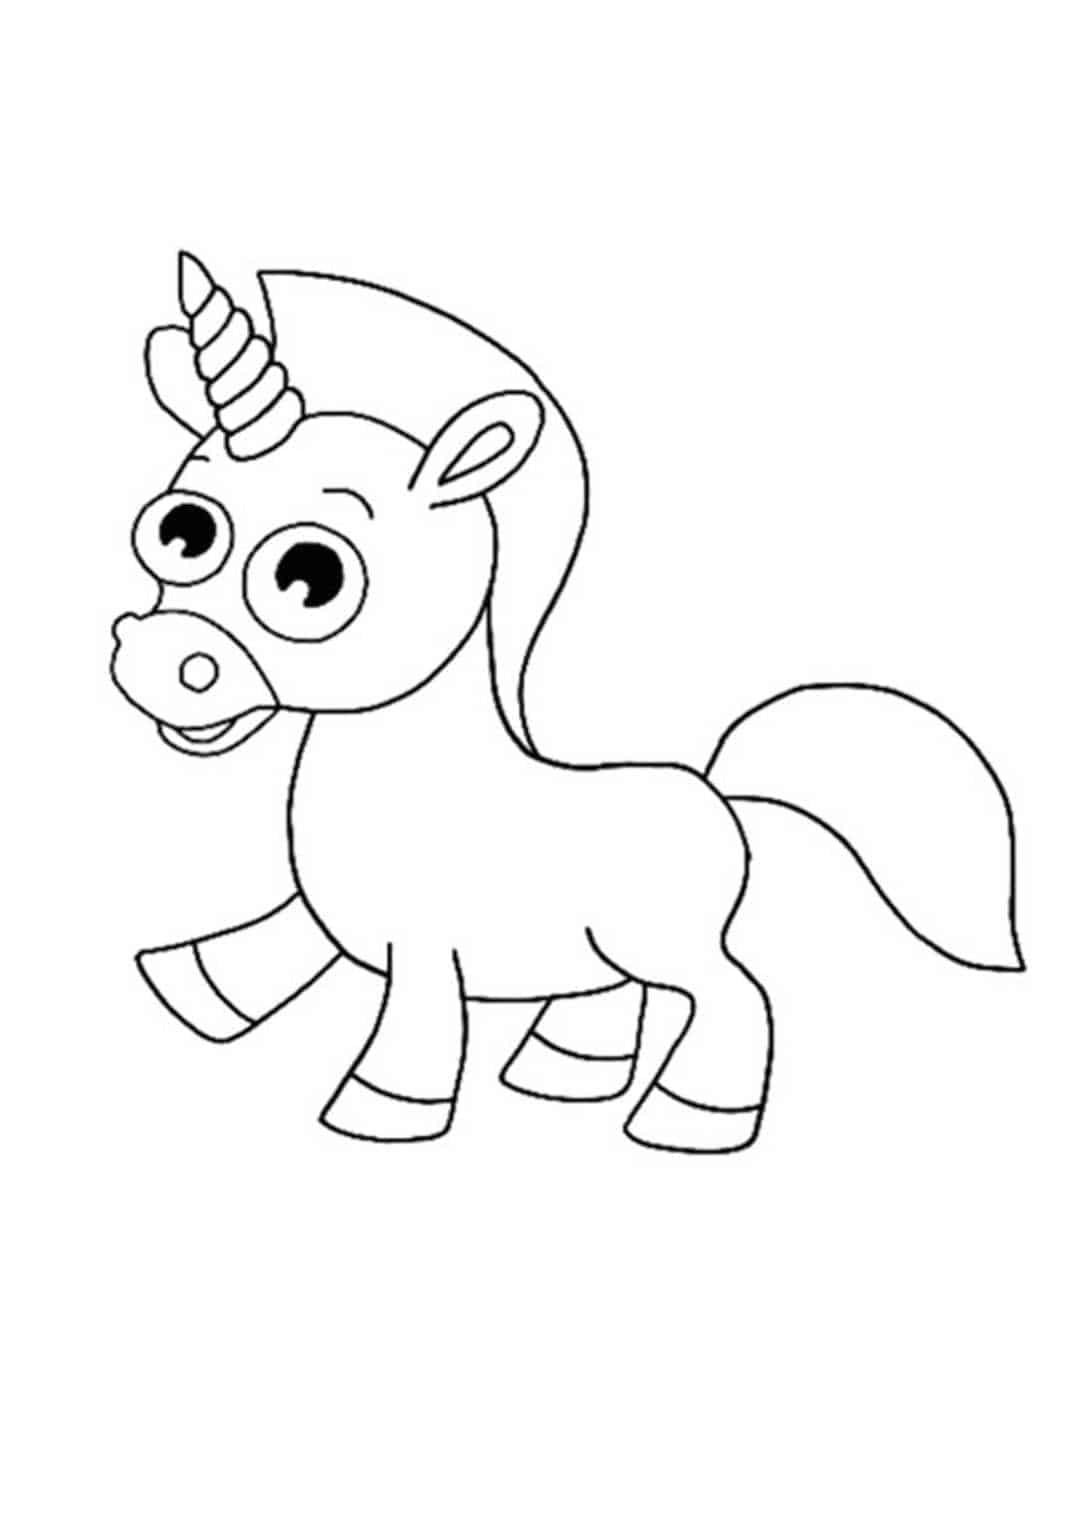 Unicorn Coloring Pages 91 Free Printable Coloring Sheets For